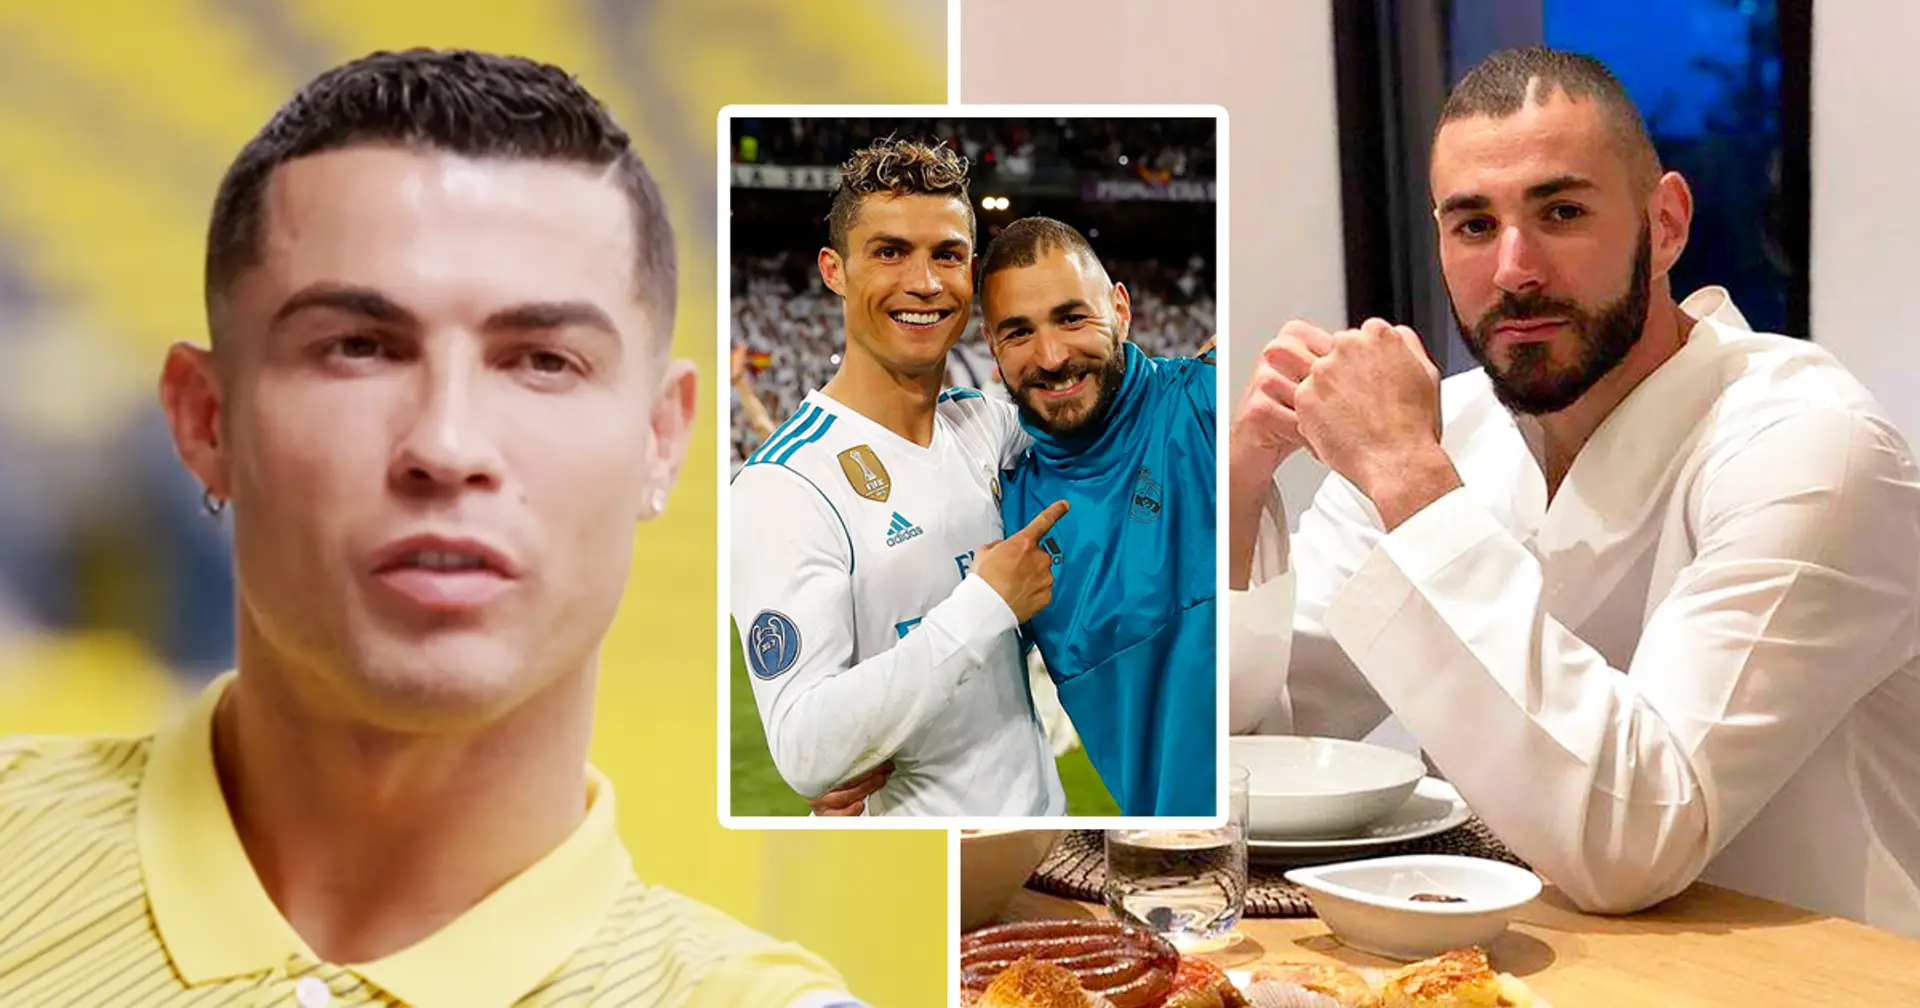 Cristiano Ronaldo clears up doubts about his future amid possible Saudi reunion with Benzema